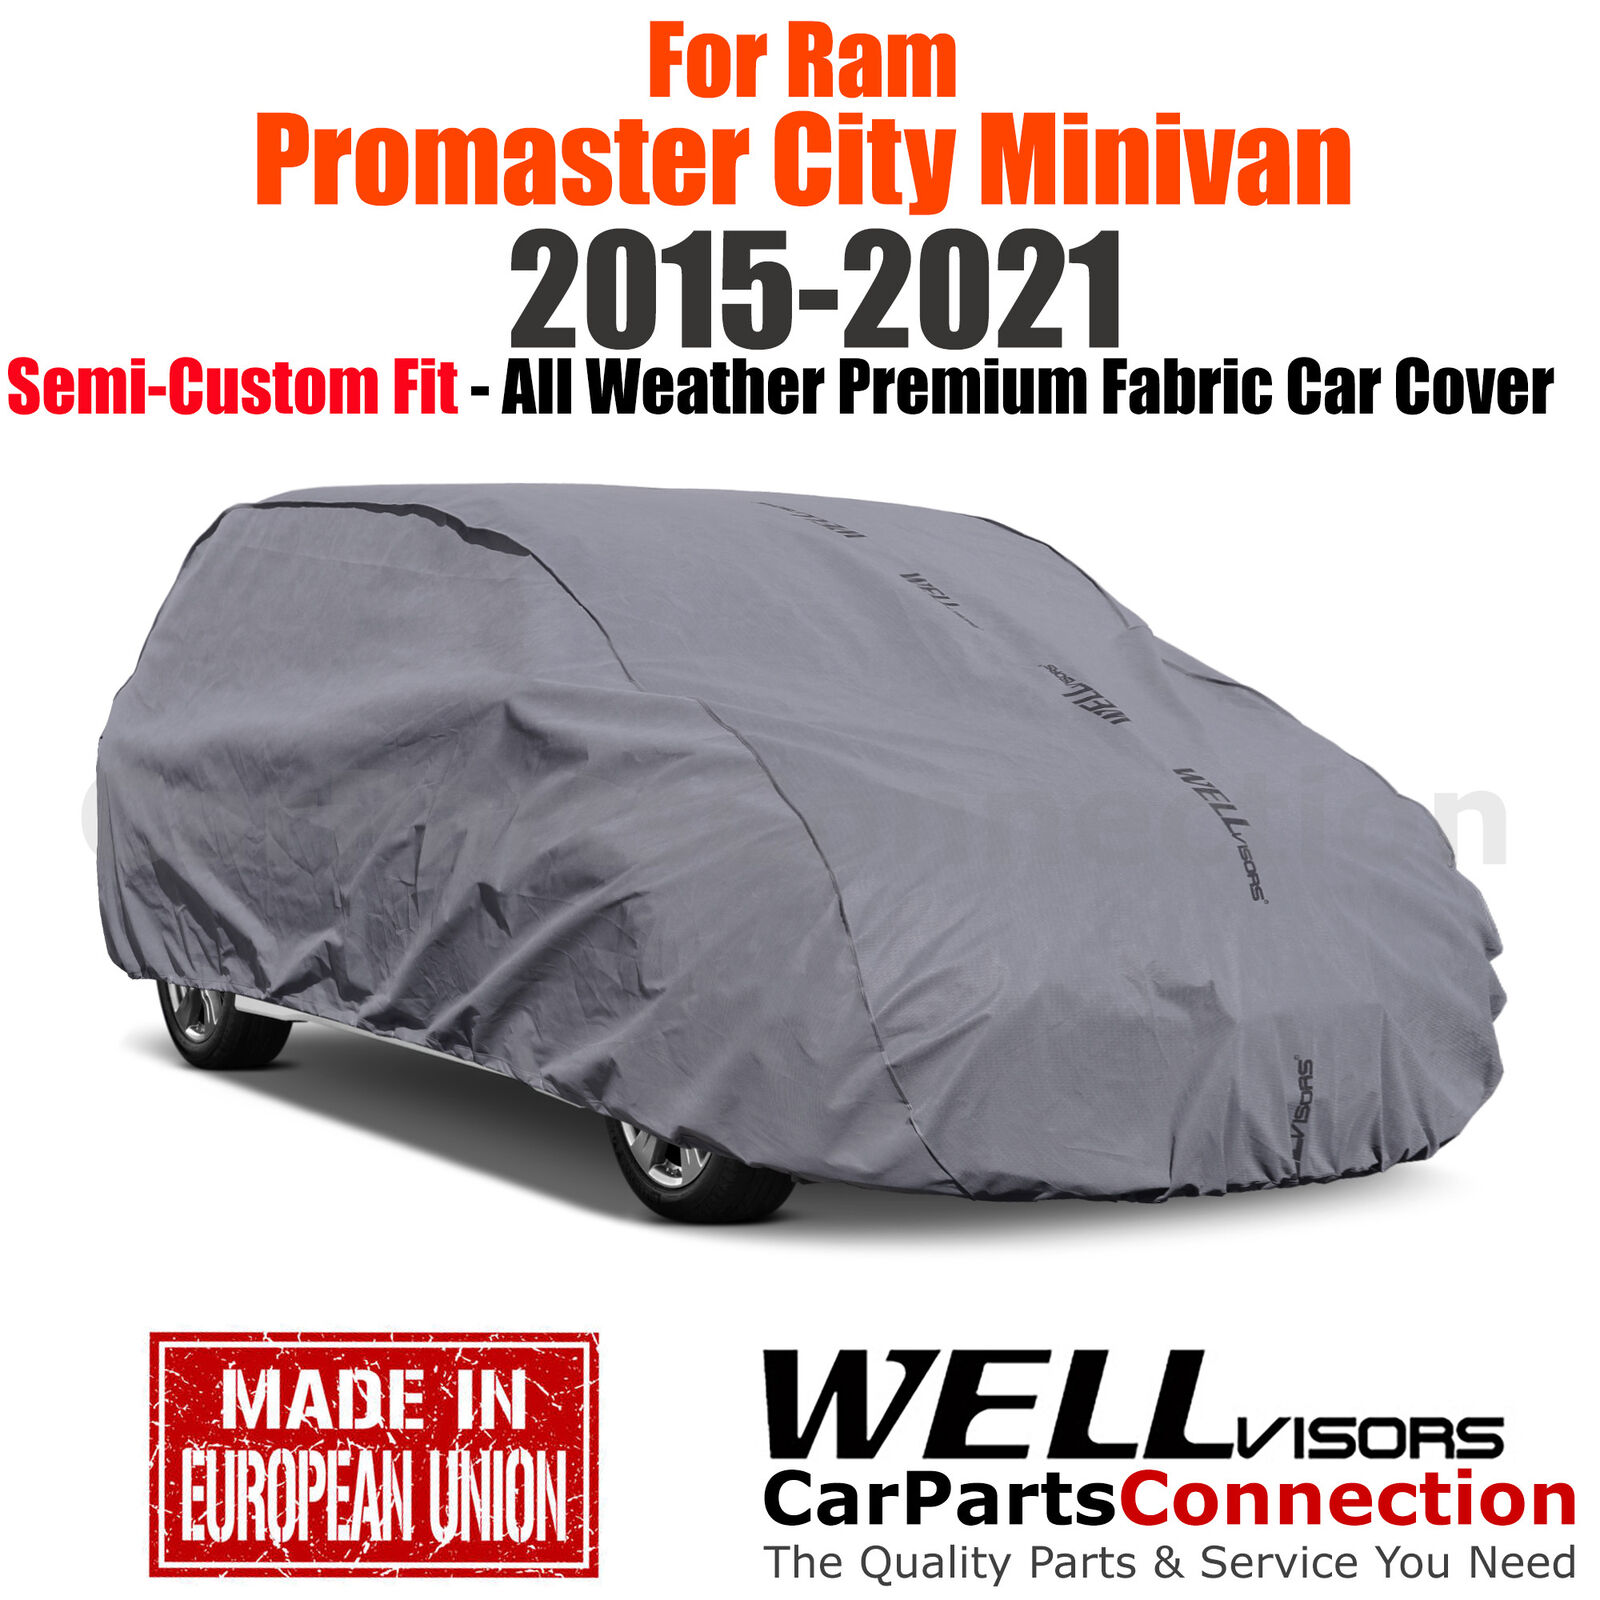 WellVisors All Weather Car Cover For 2015-2022 Ram Promaster City Minivan